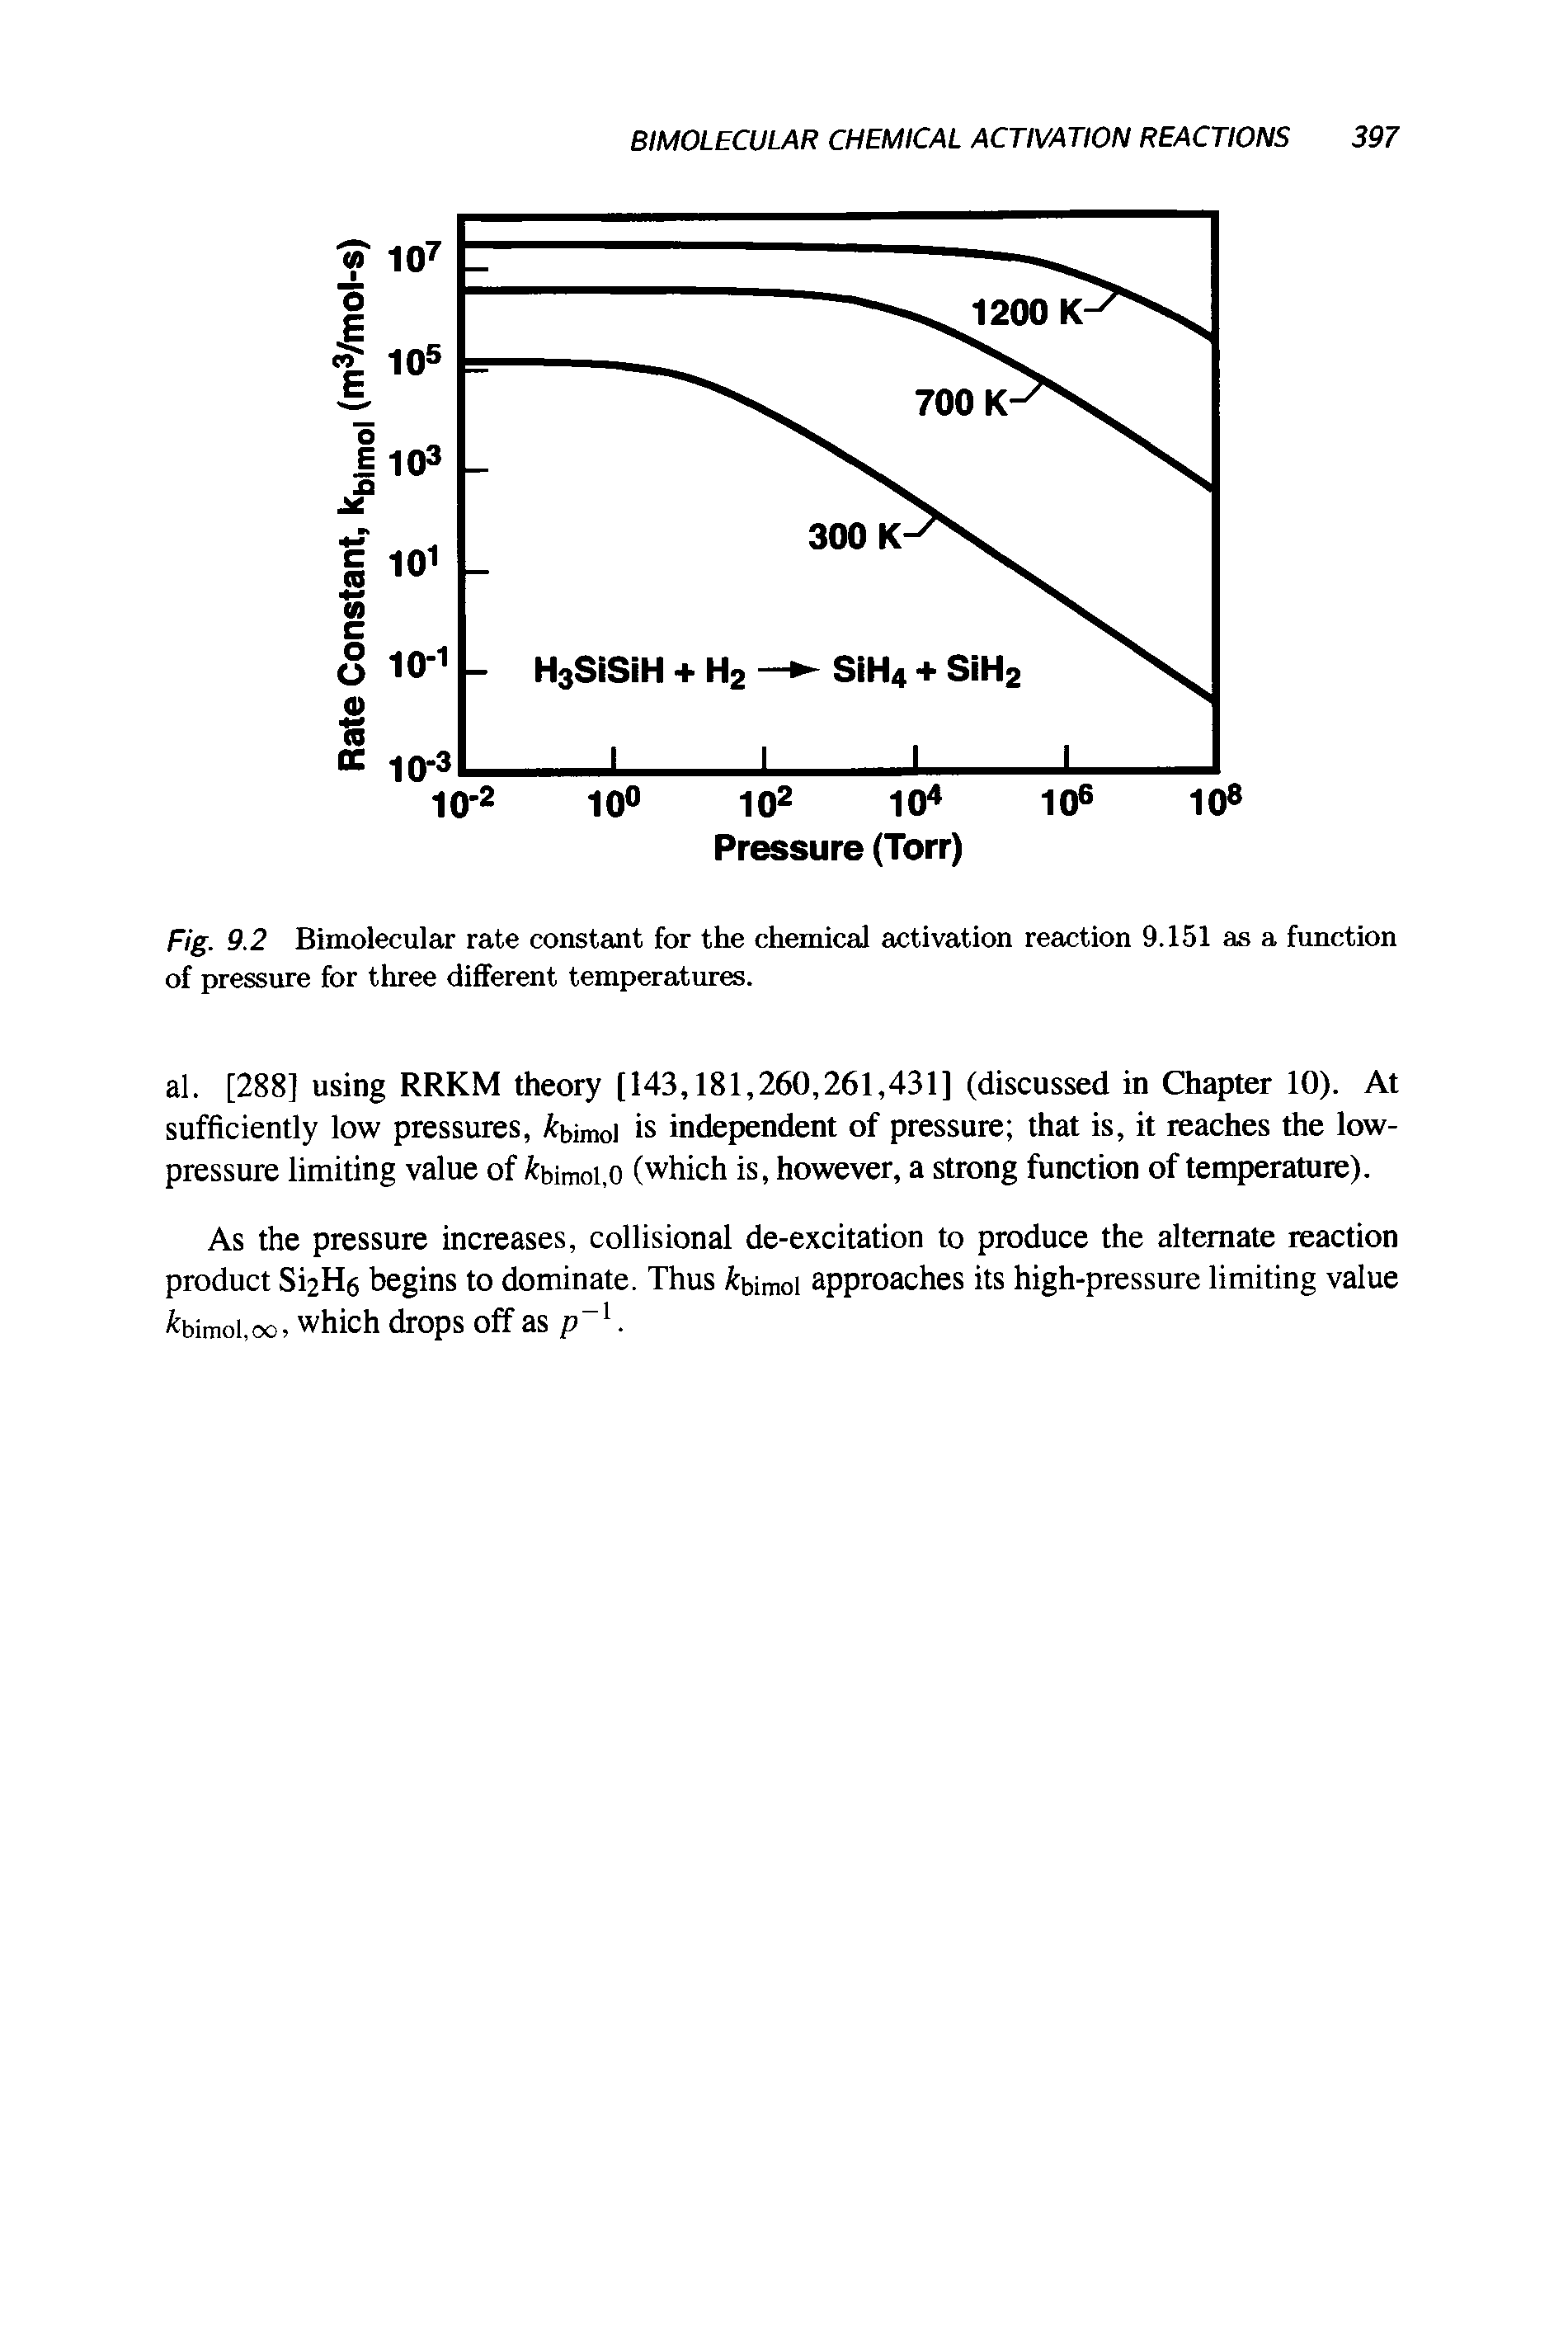 Fig. 9.2 Bimolecular rate constant for the chemical activation reaction 9.151 as a function of pressure for three different temperatures.